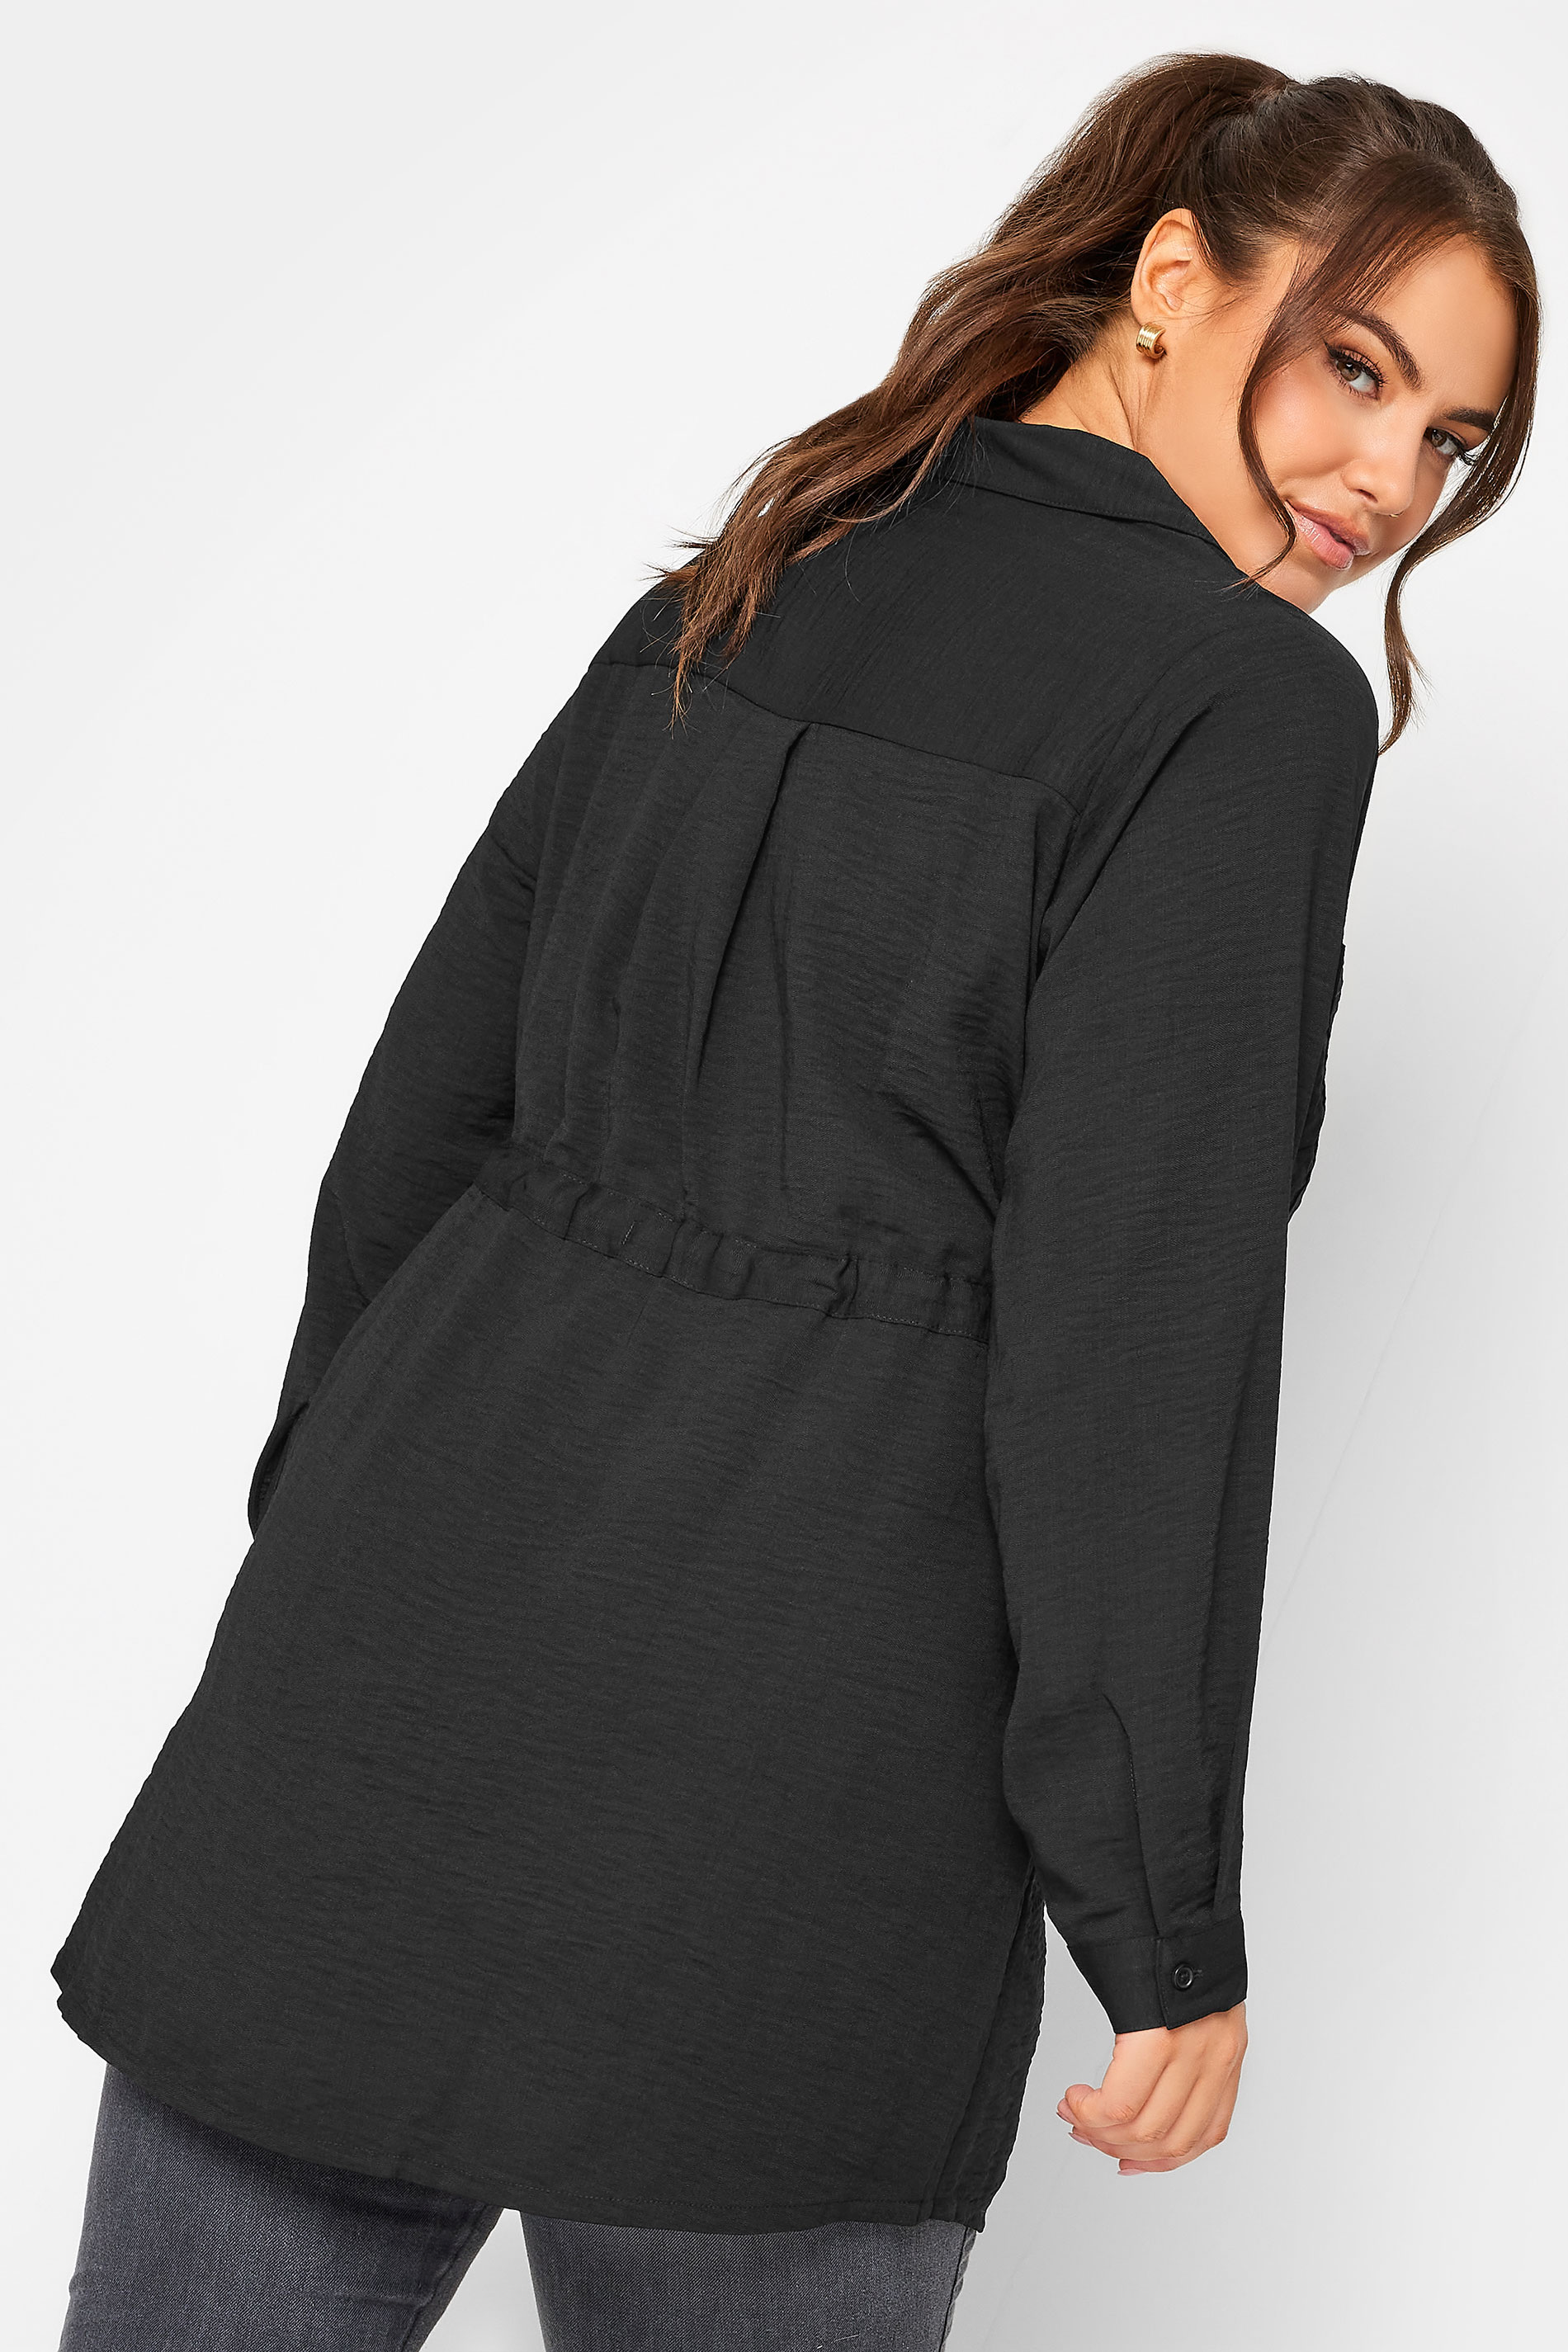 YOURS Curve Plus Size Black Utility Tunic Shirt | Yours Clothing  3